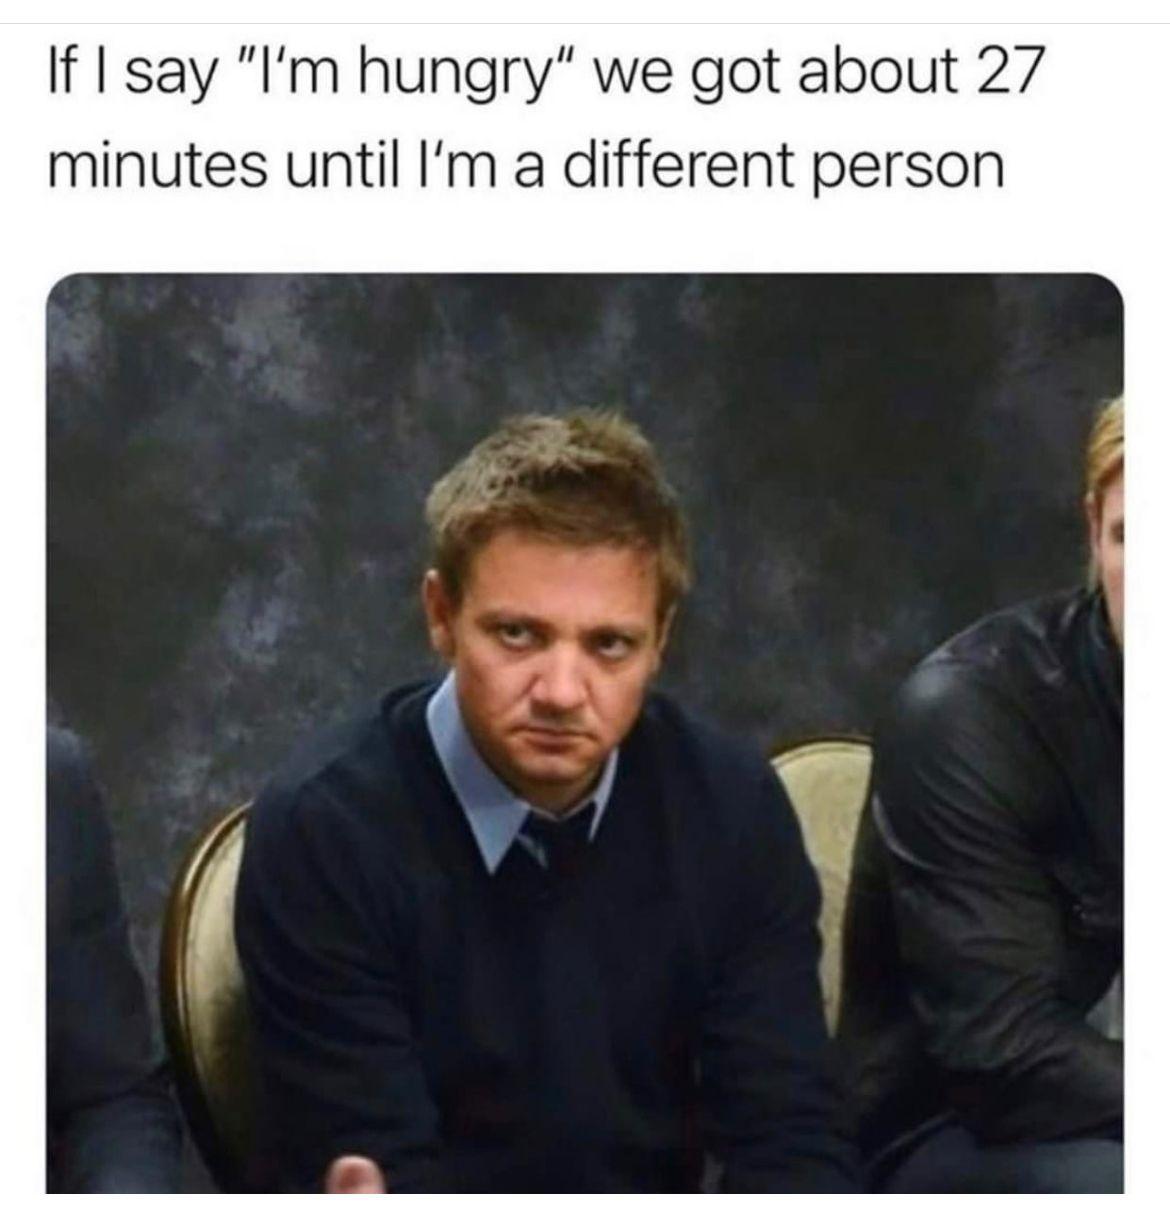 dank memes - if i say i m hungry we got - If I say "I'm hungry" we got about 27 minutes until I'm a different person